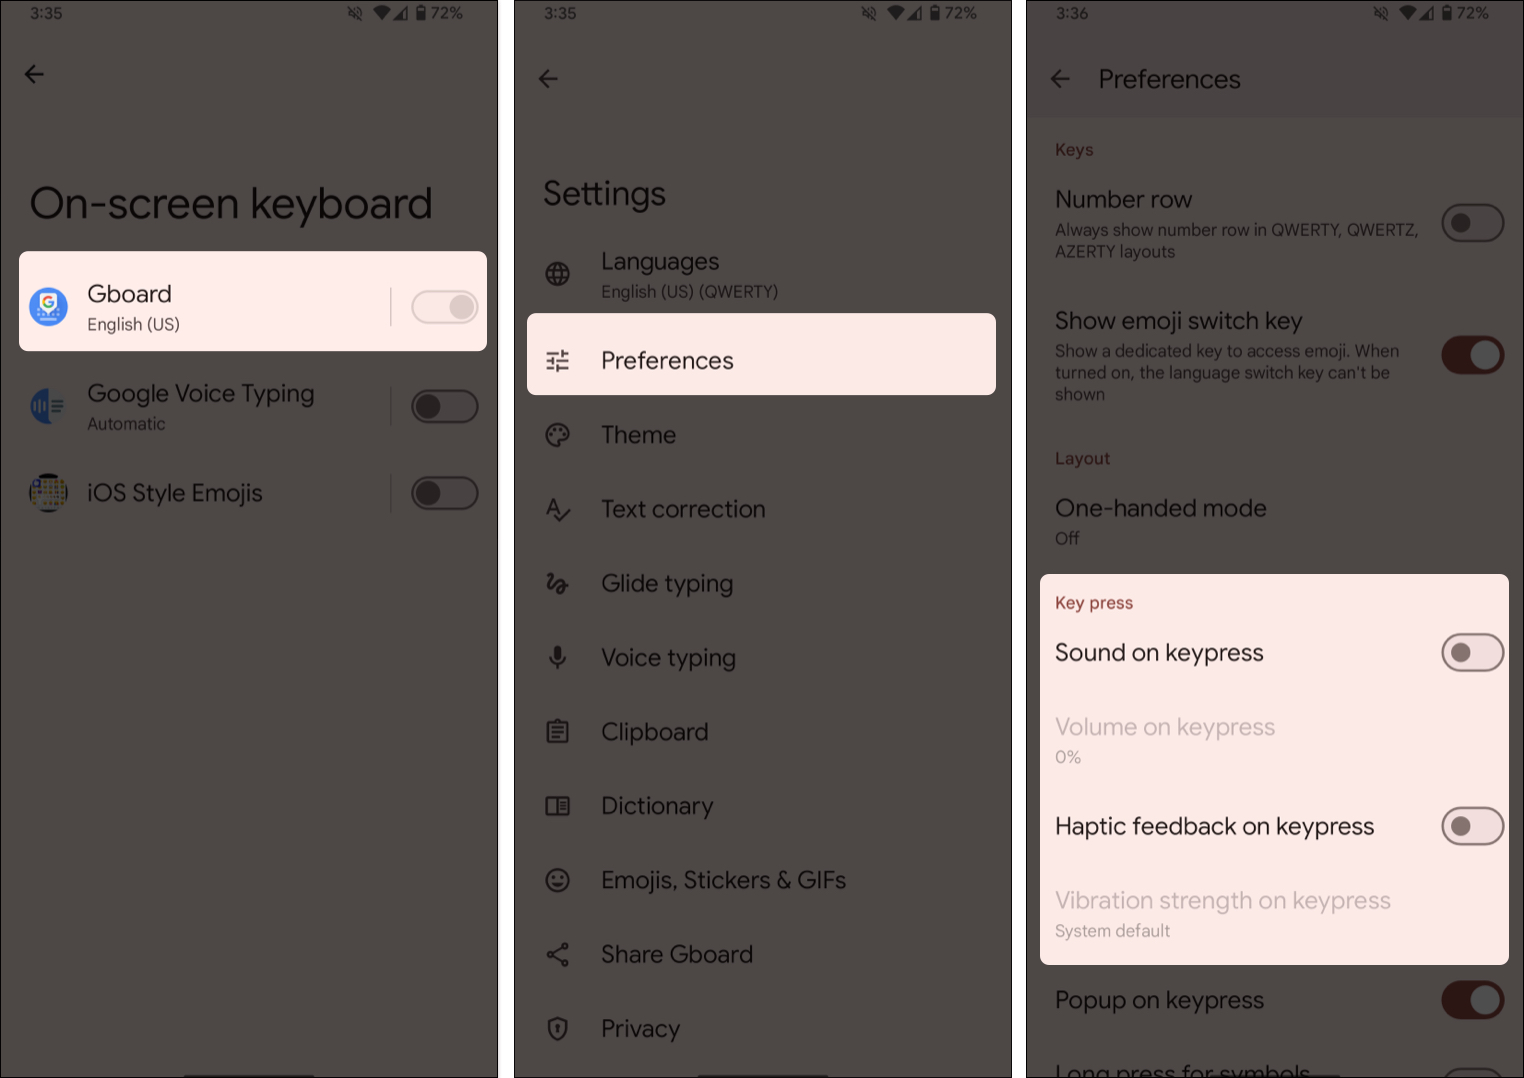 Select Gboard, tap preferences, toggle off sound on keypress and haptic feedback on keypress